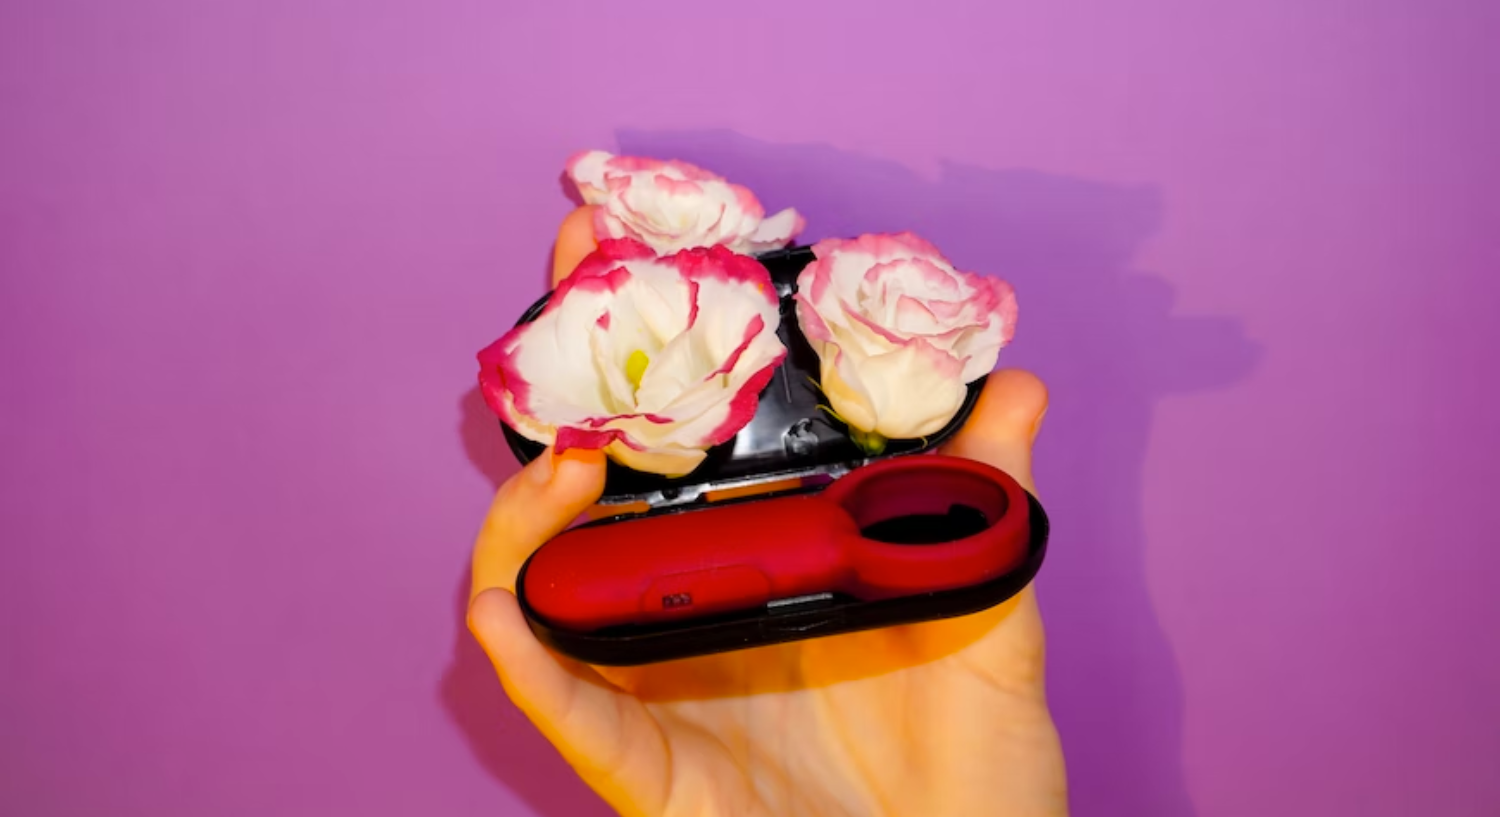 A hand holding a case with a bullet vibrator and flowers